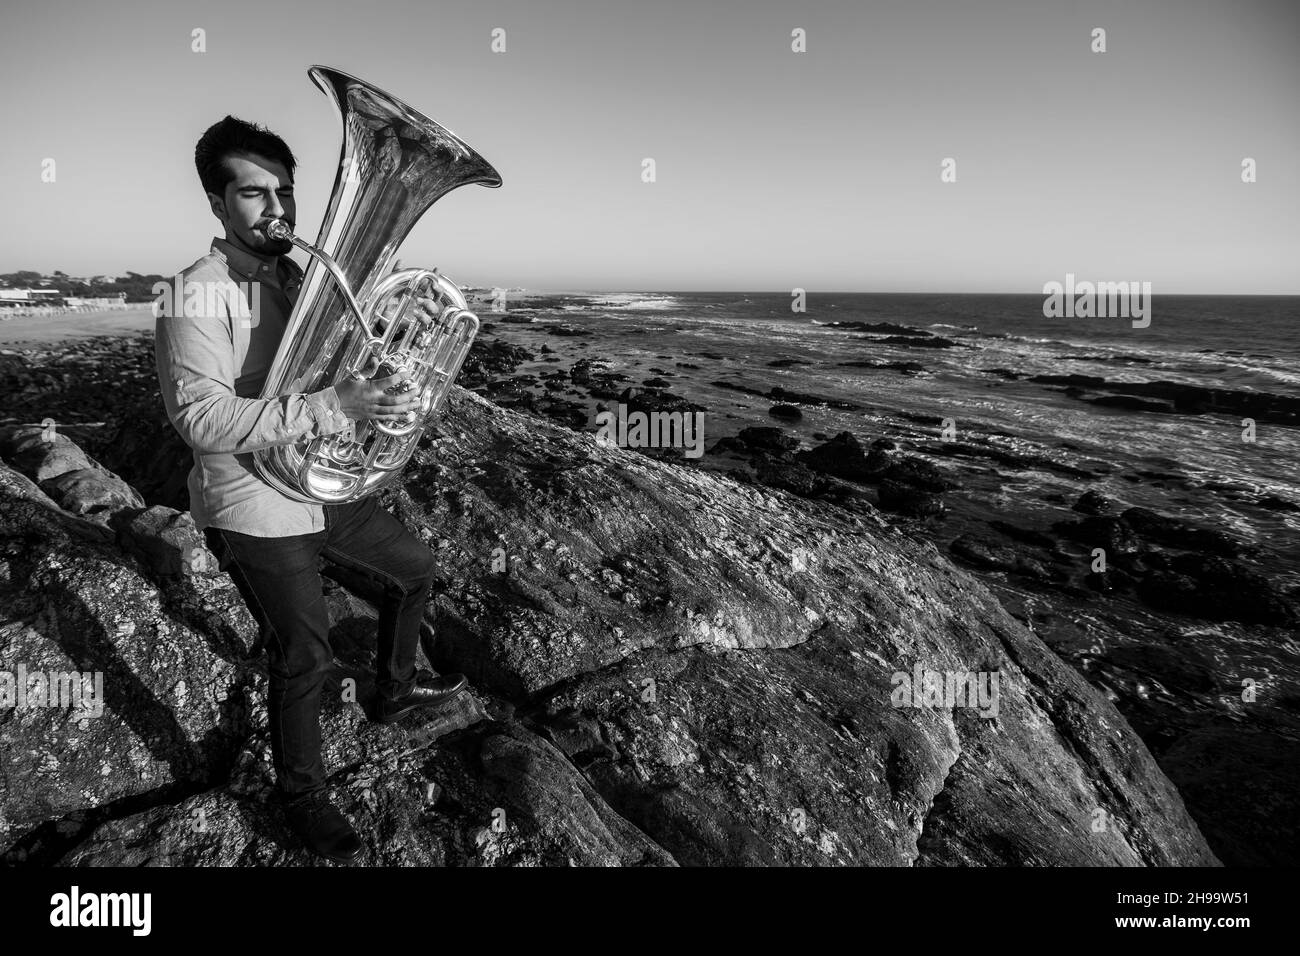 Musician standing on the rocks with a tuba on the ocean shore. Black and white photo. Stock Photo